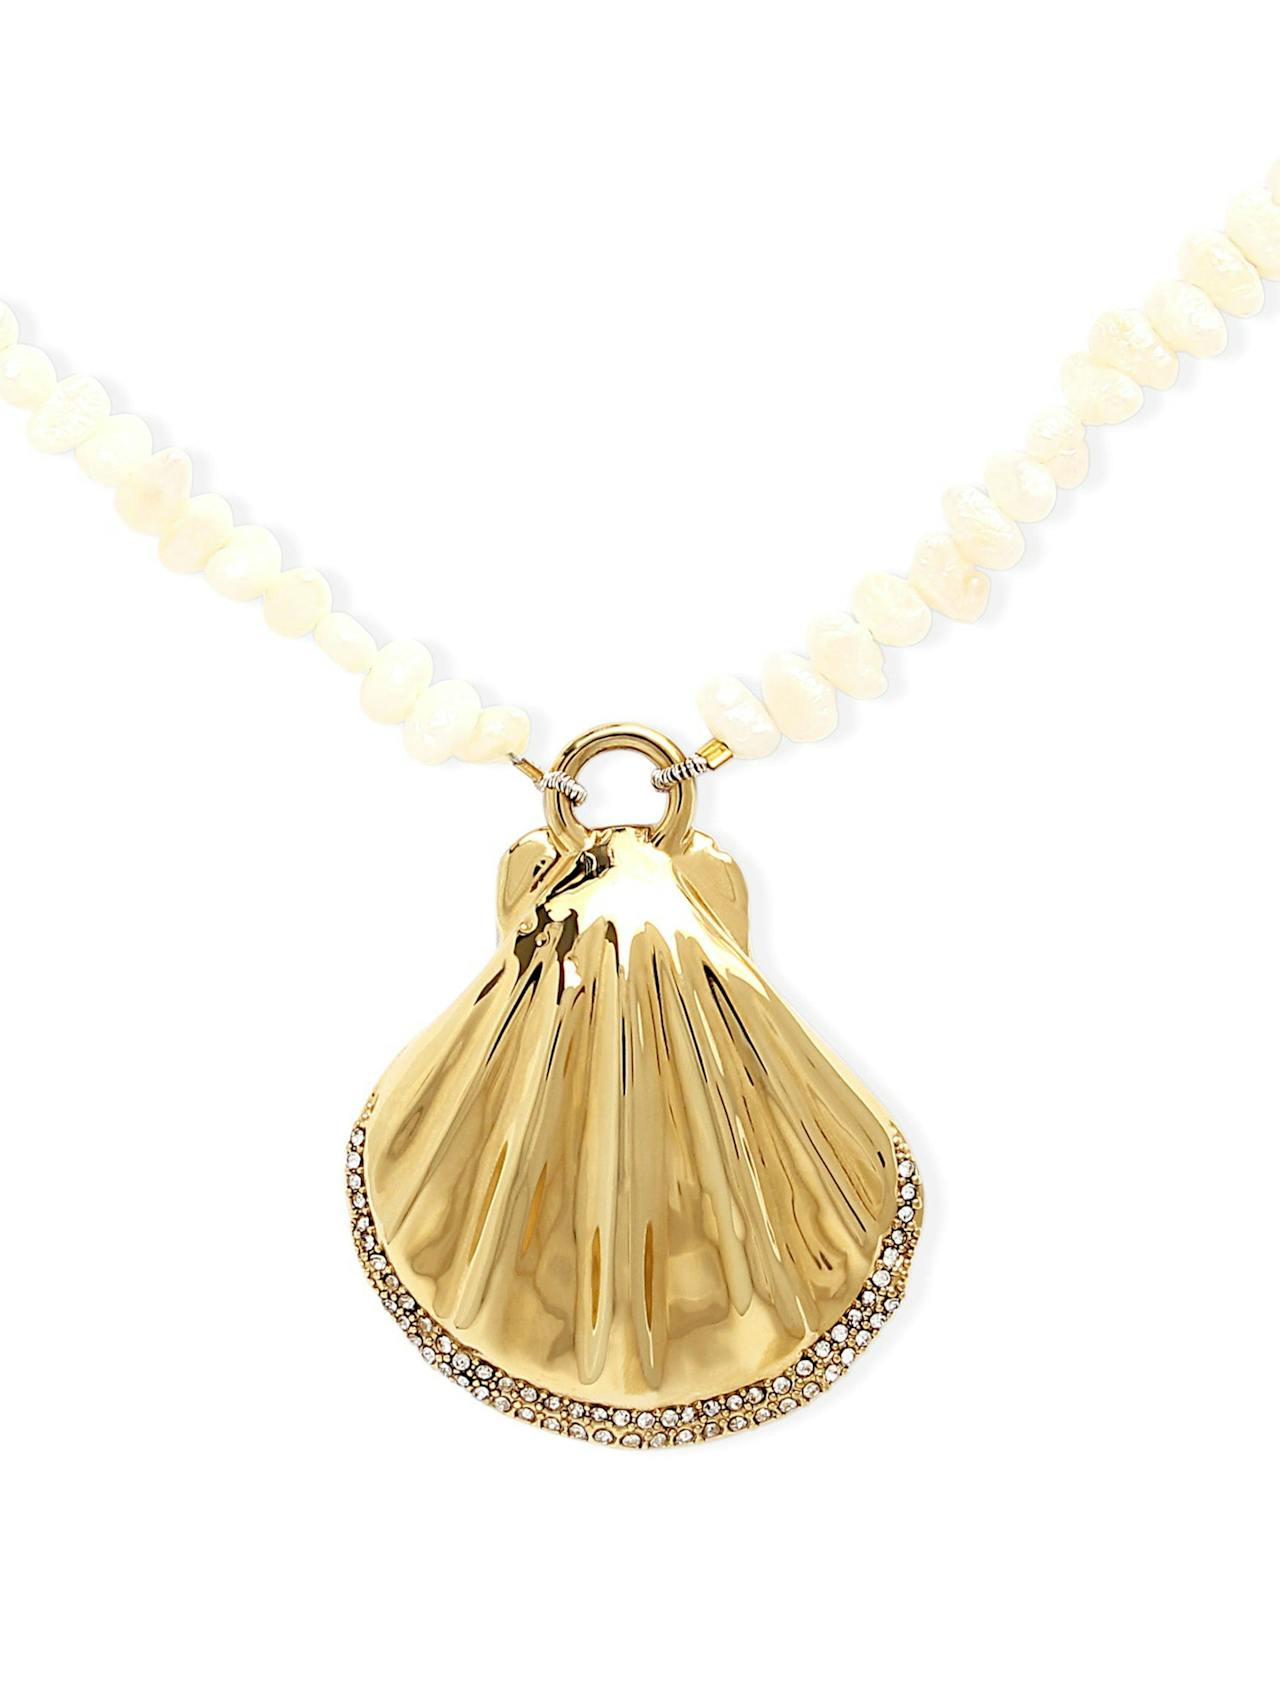 Gold Mia necklace with pearls